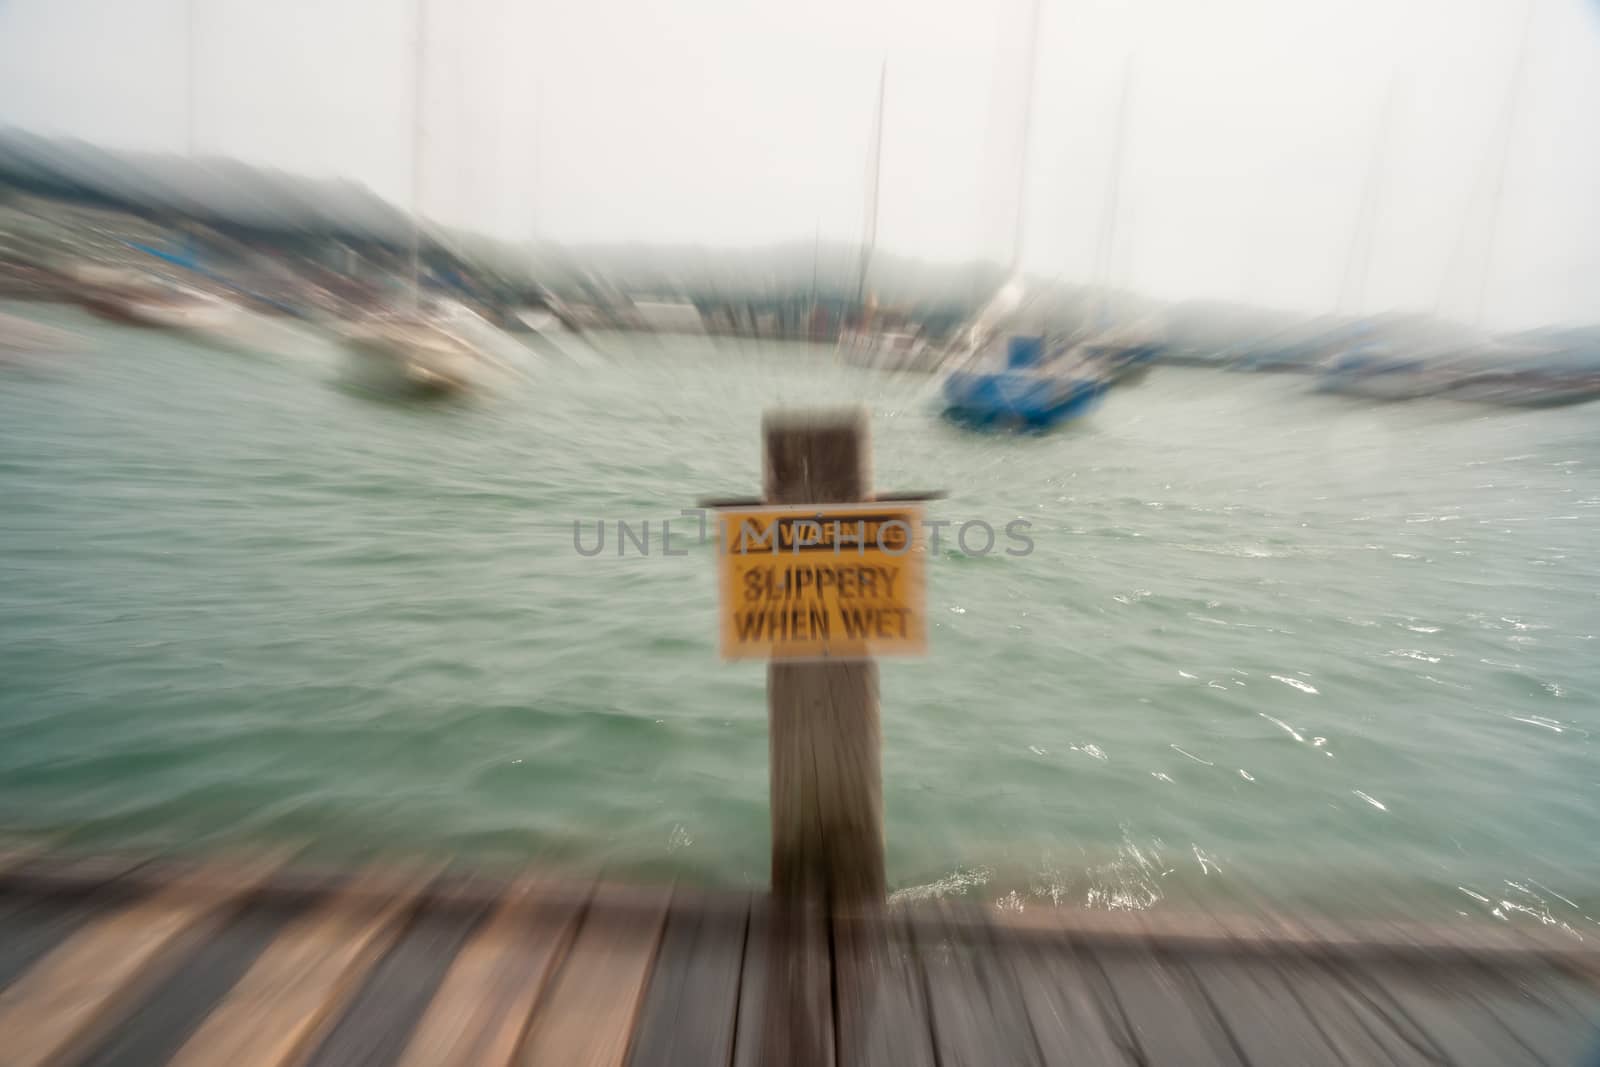 Slippery when wet sign in zoom blur effect by brians101